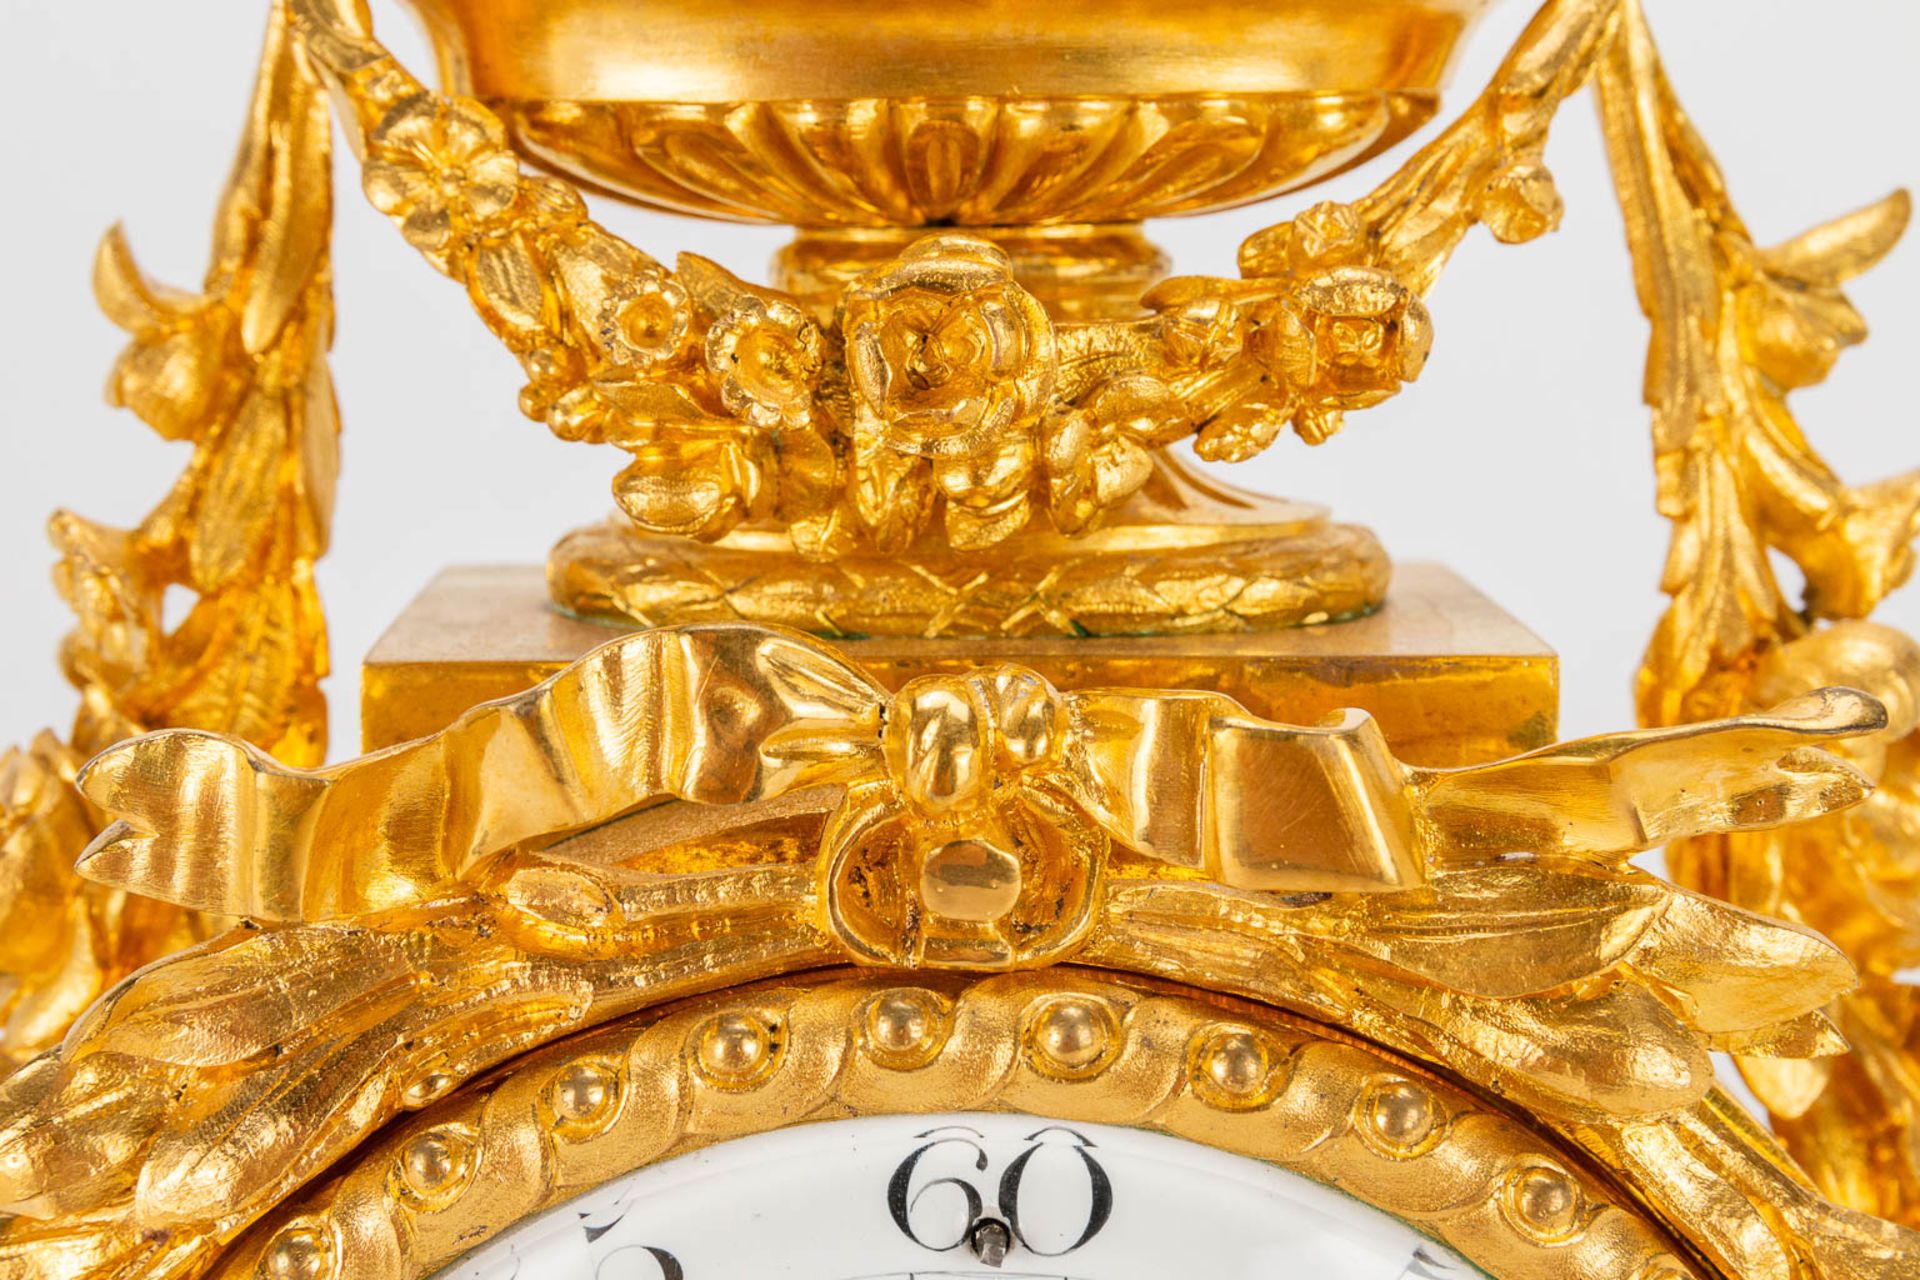 A bronze ormolu table clock made in Louis XVI style. 19th century. (15 x 41 x 42 cm) - Image 17 of 20